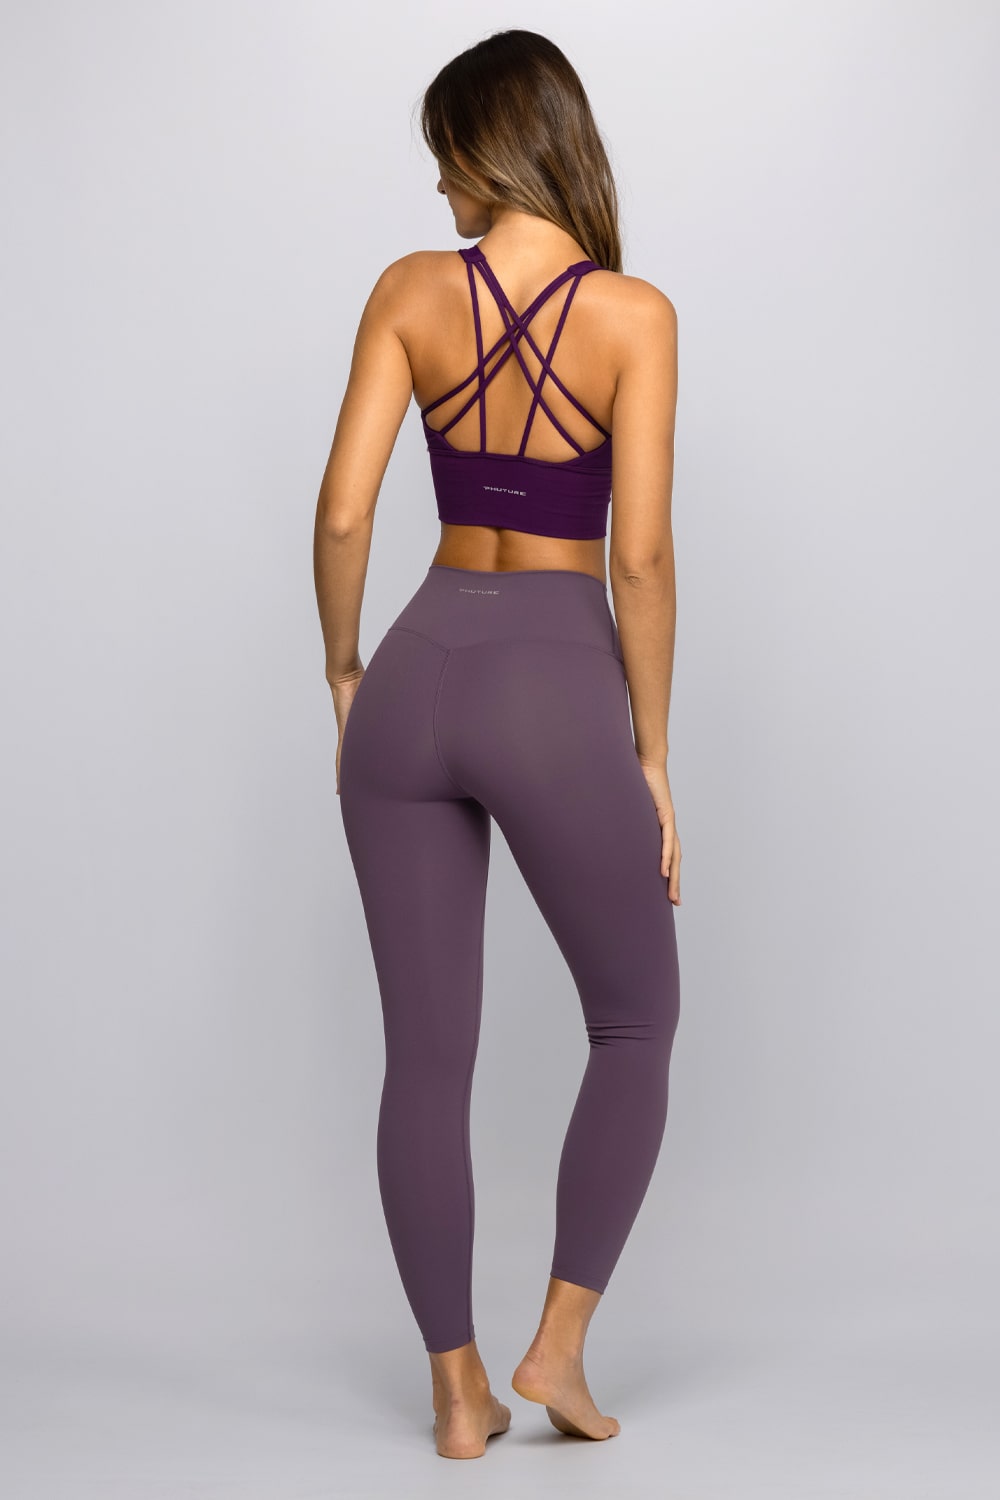 Luxana Lavender Outfit - Priscilla Ricart